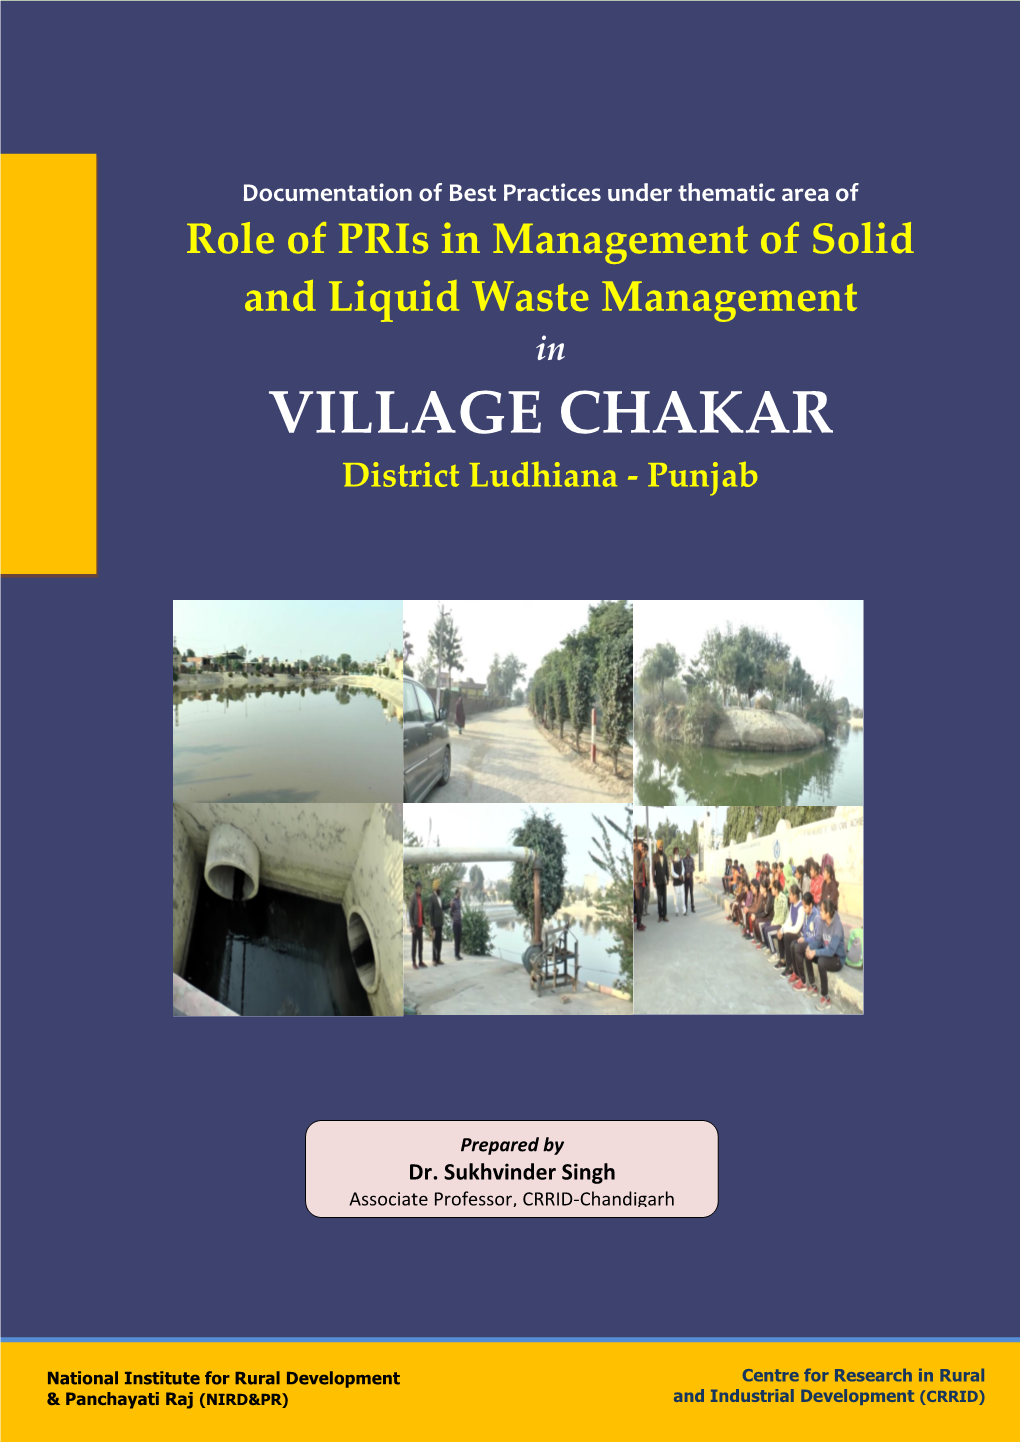 Role of Pris in Solid and Liquid Waste Management in Village Chakar Ludhiana Punjab